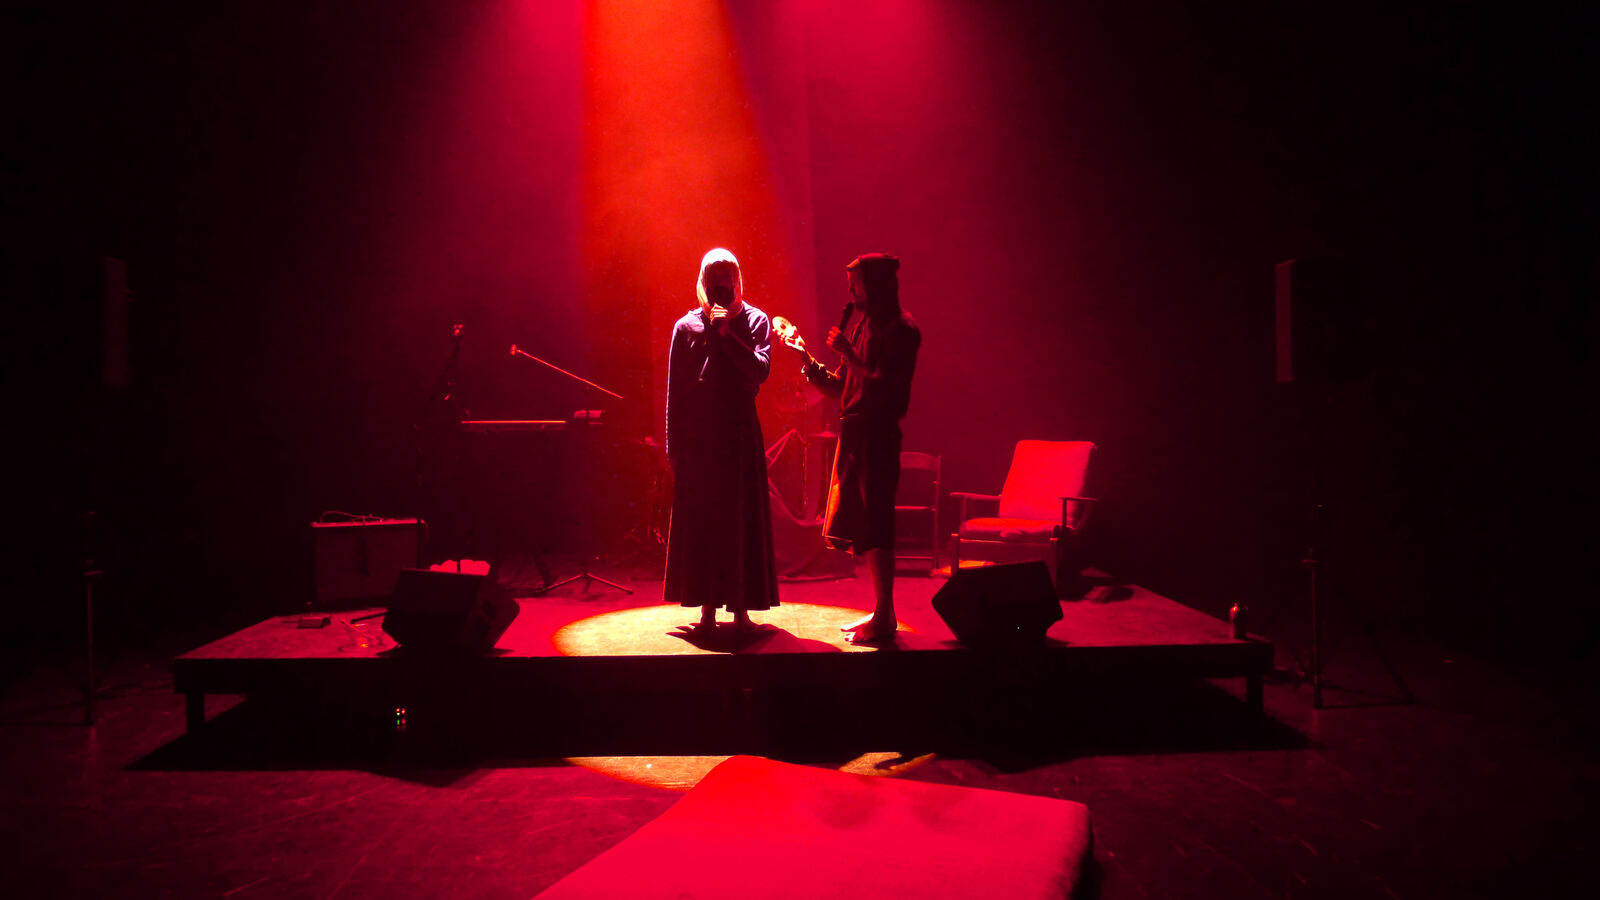 two men silhouetted in a red light perform